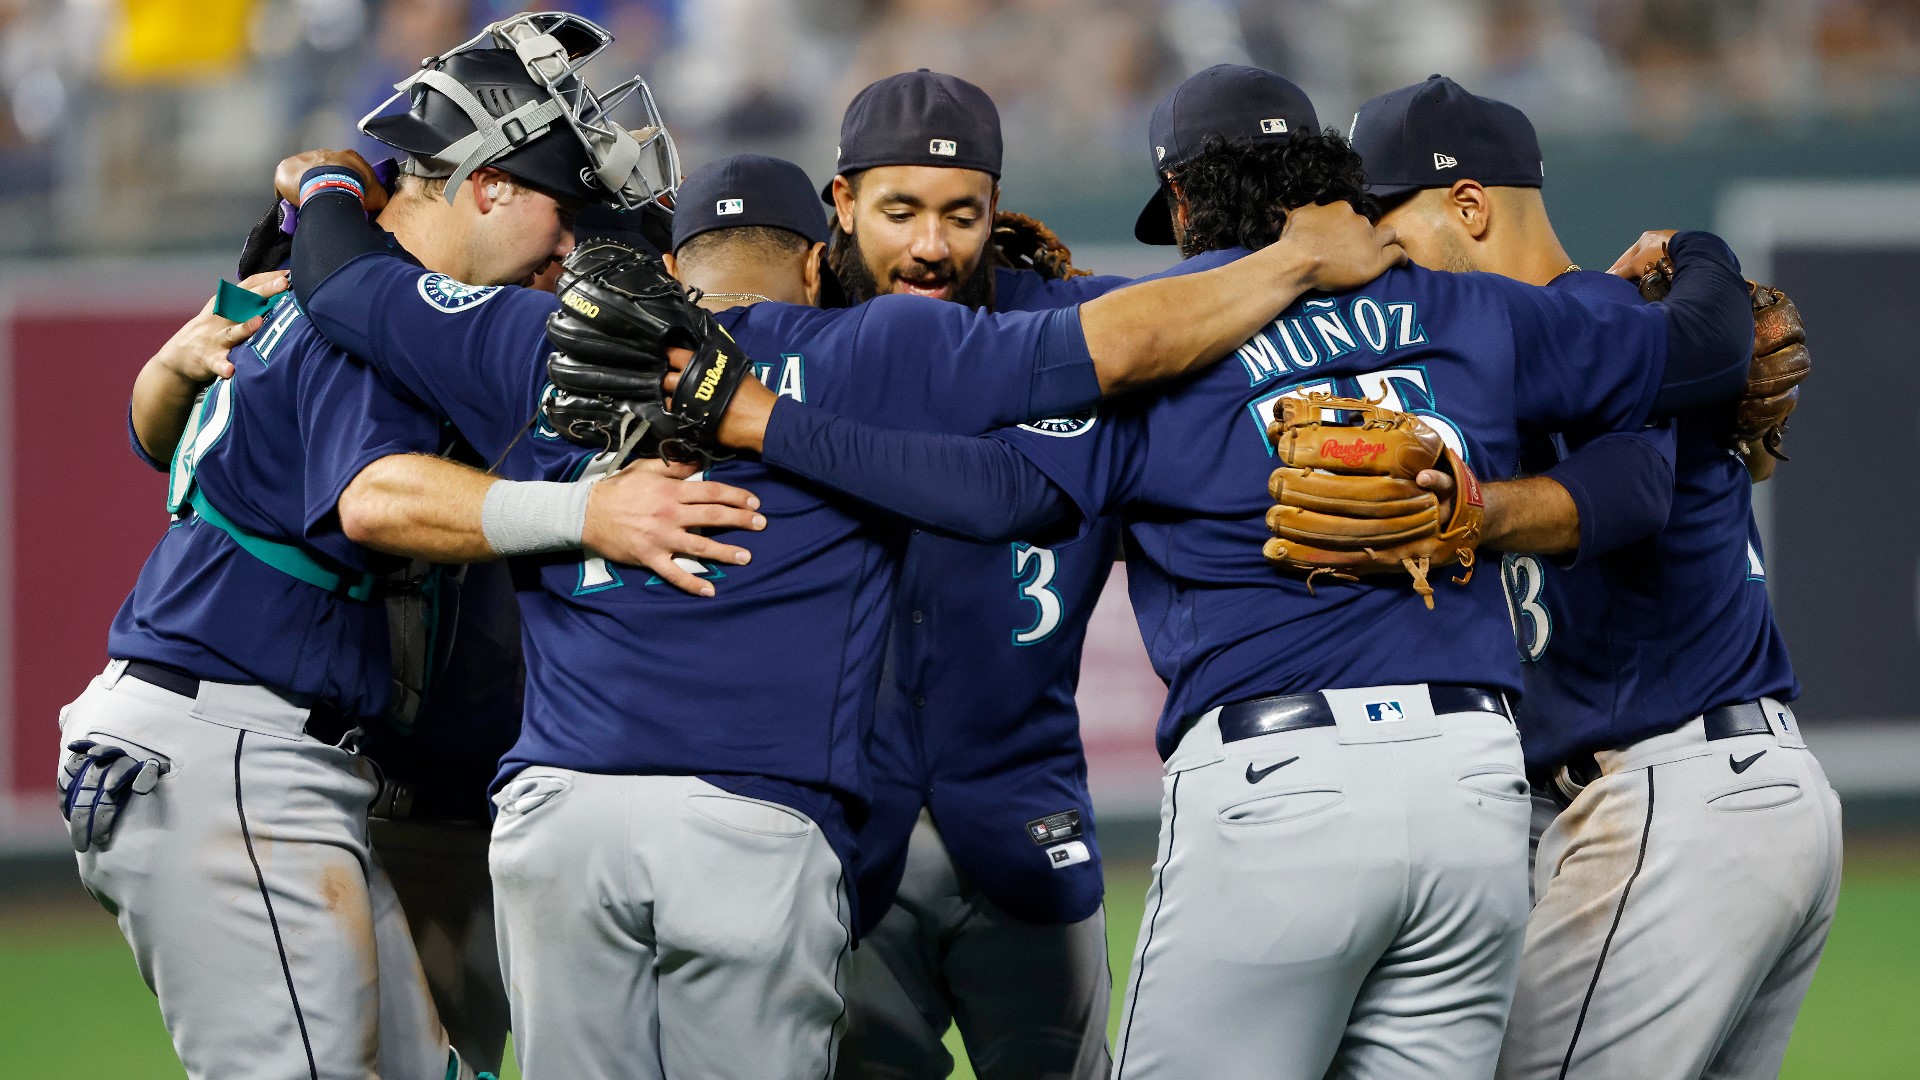 Rays magic number: How close is Tampa Bay to clinching playoff